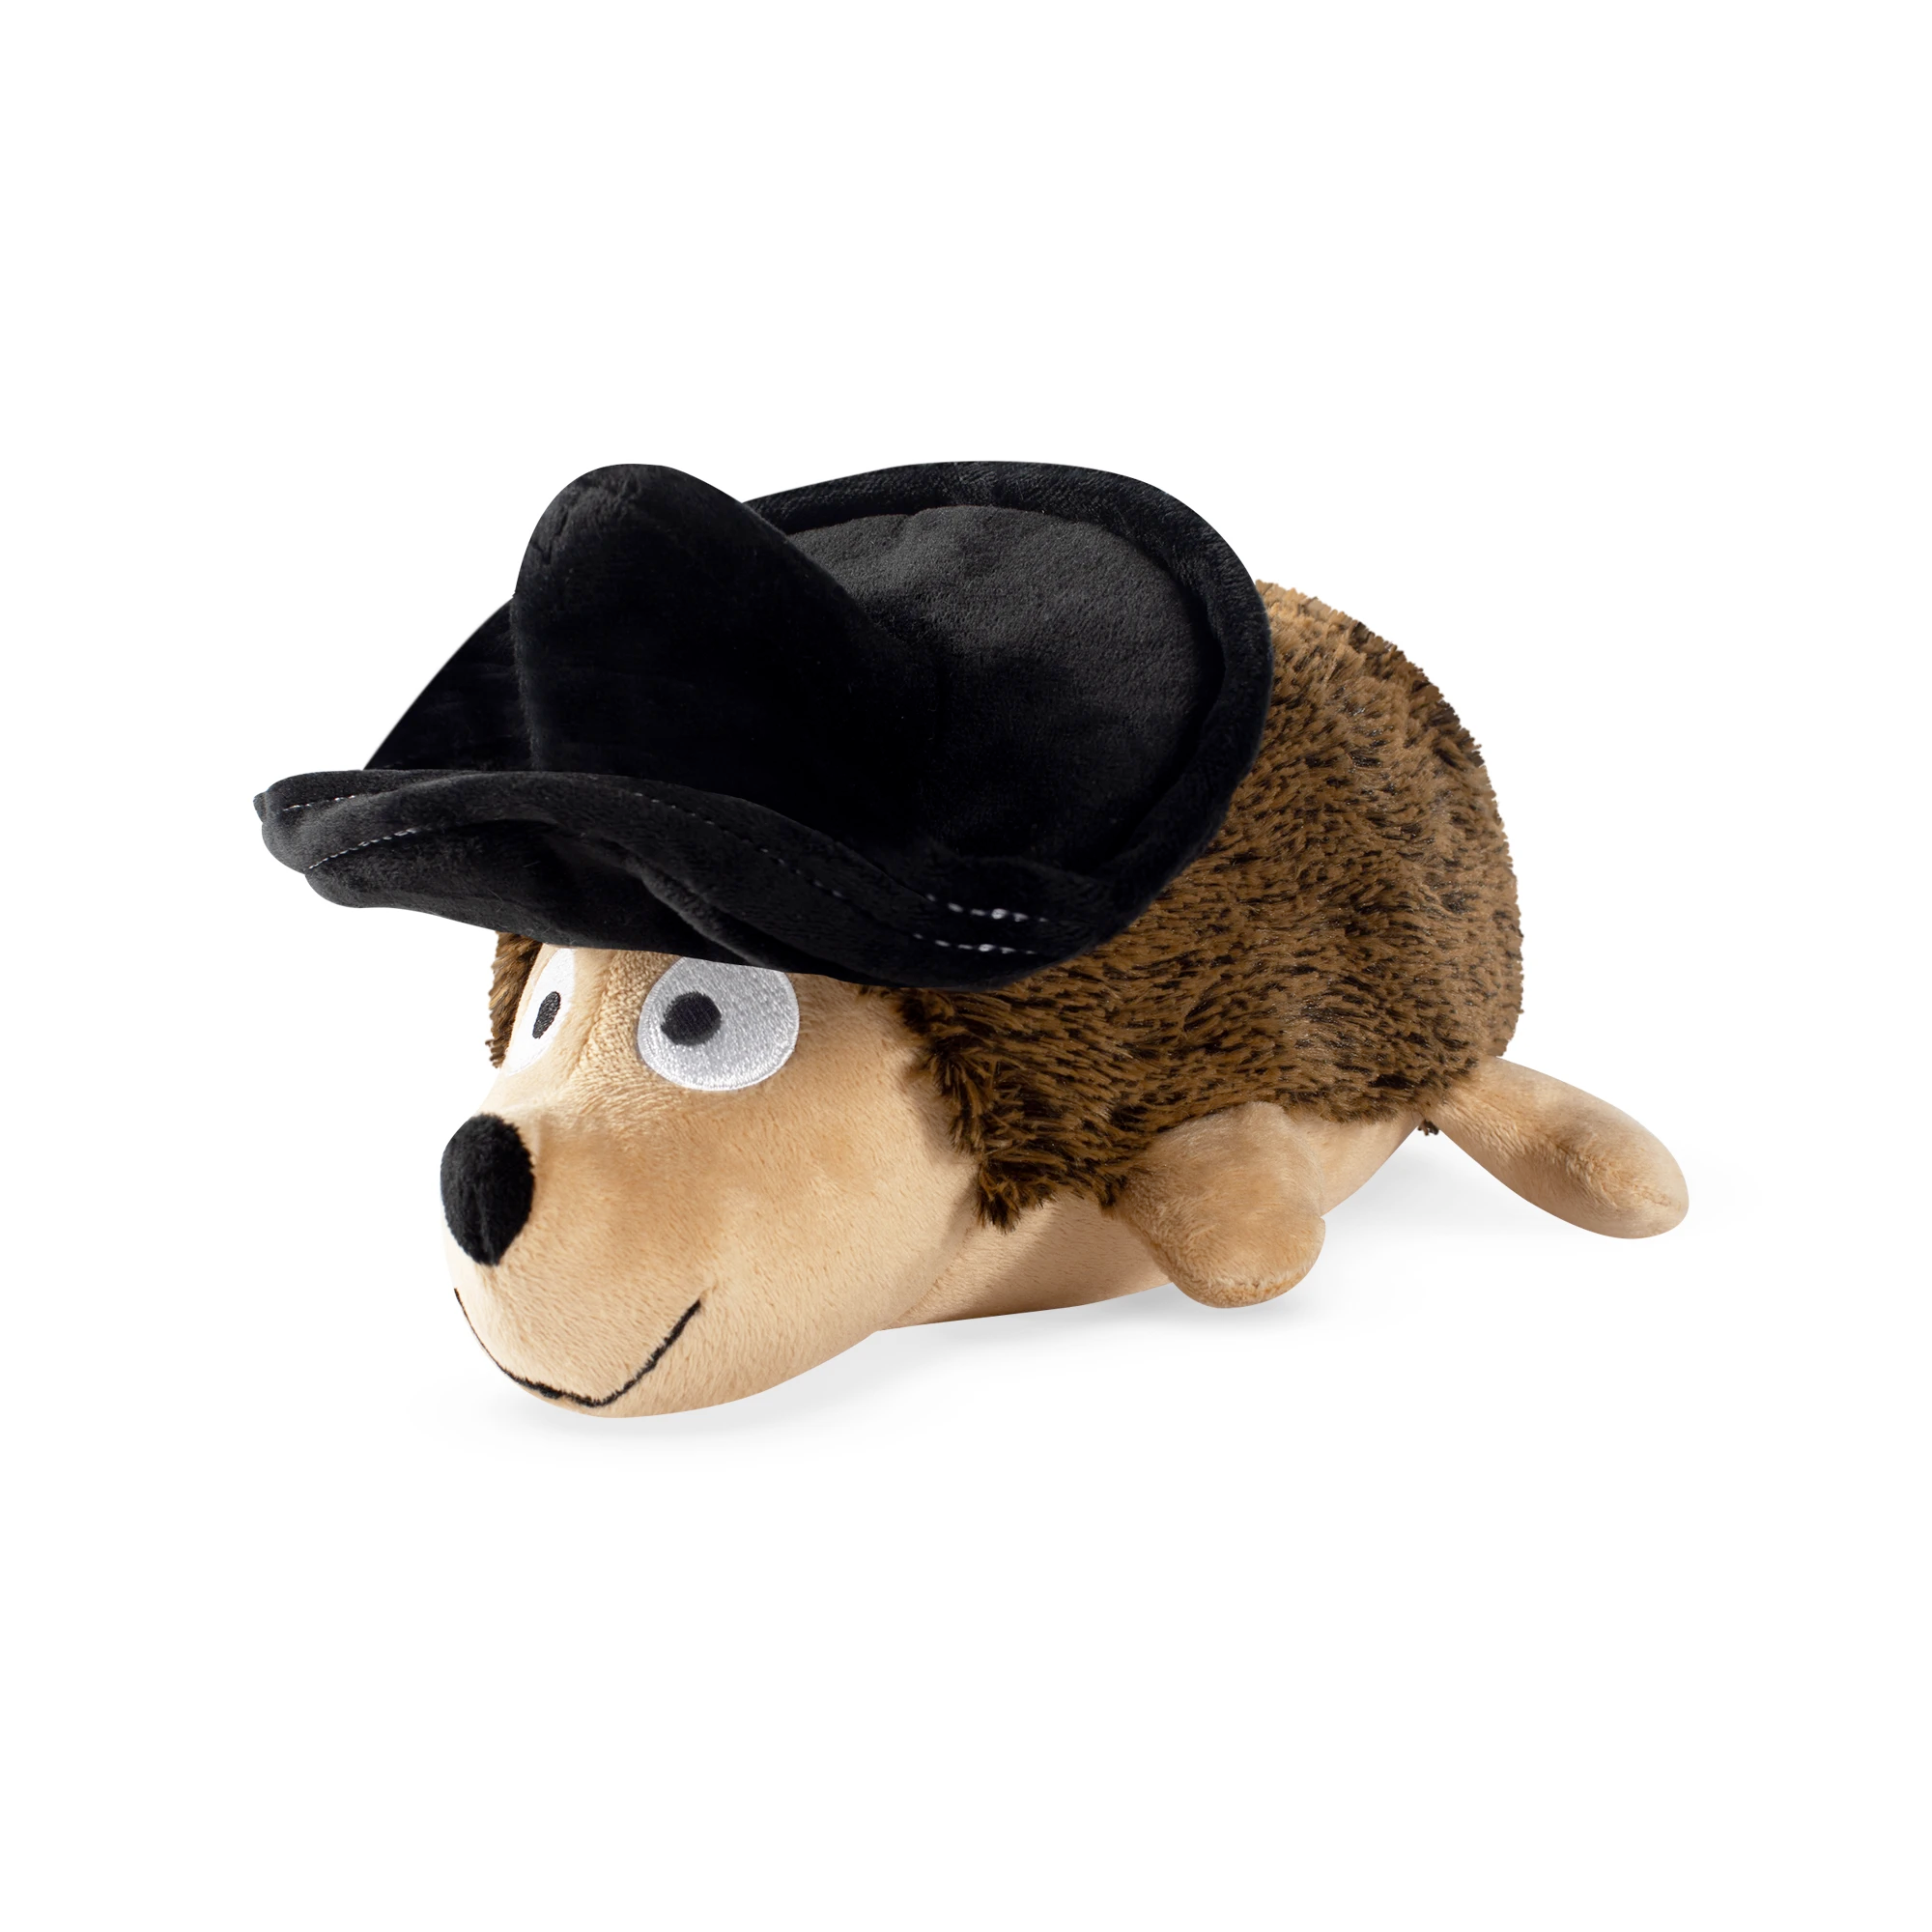 Francisco the Hedgehog, Squeaky Plush Dog toy